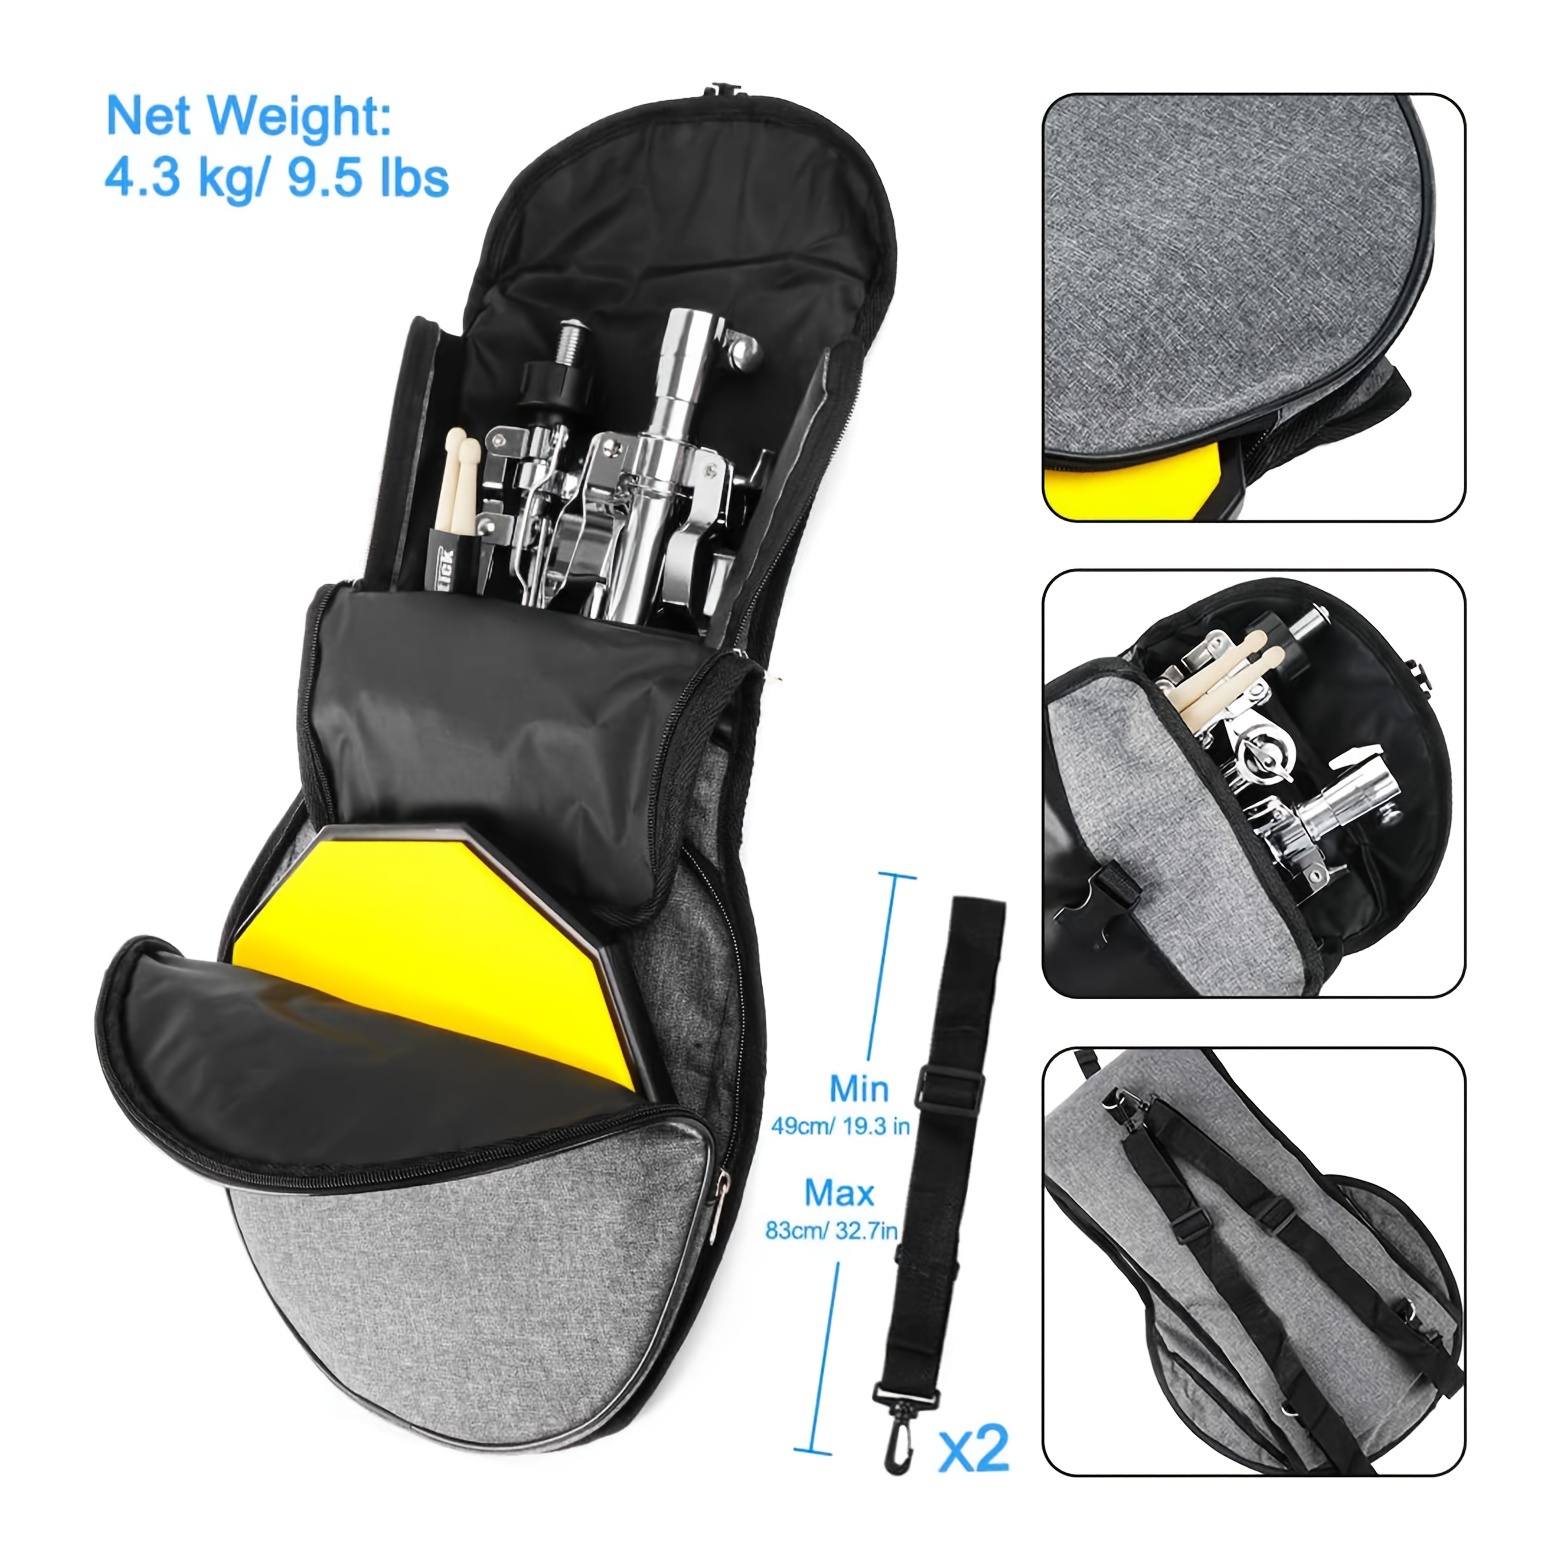 Upgrade Your Drum Practice with the Panda 12 Double-Sided Silent Practice  Pad Kit - Includes Stand, Drumsticks, Holder & Bag!